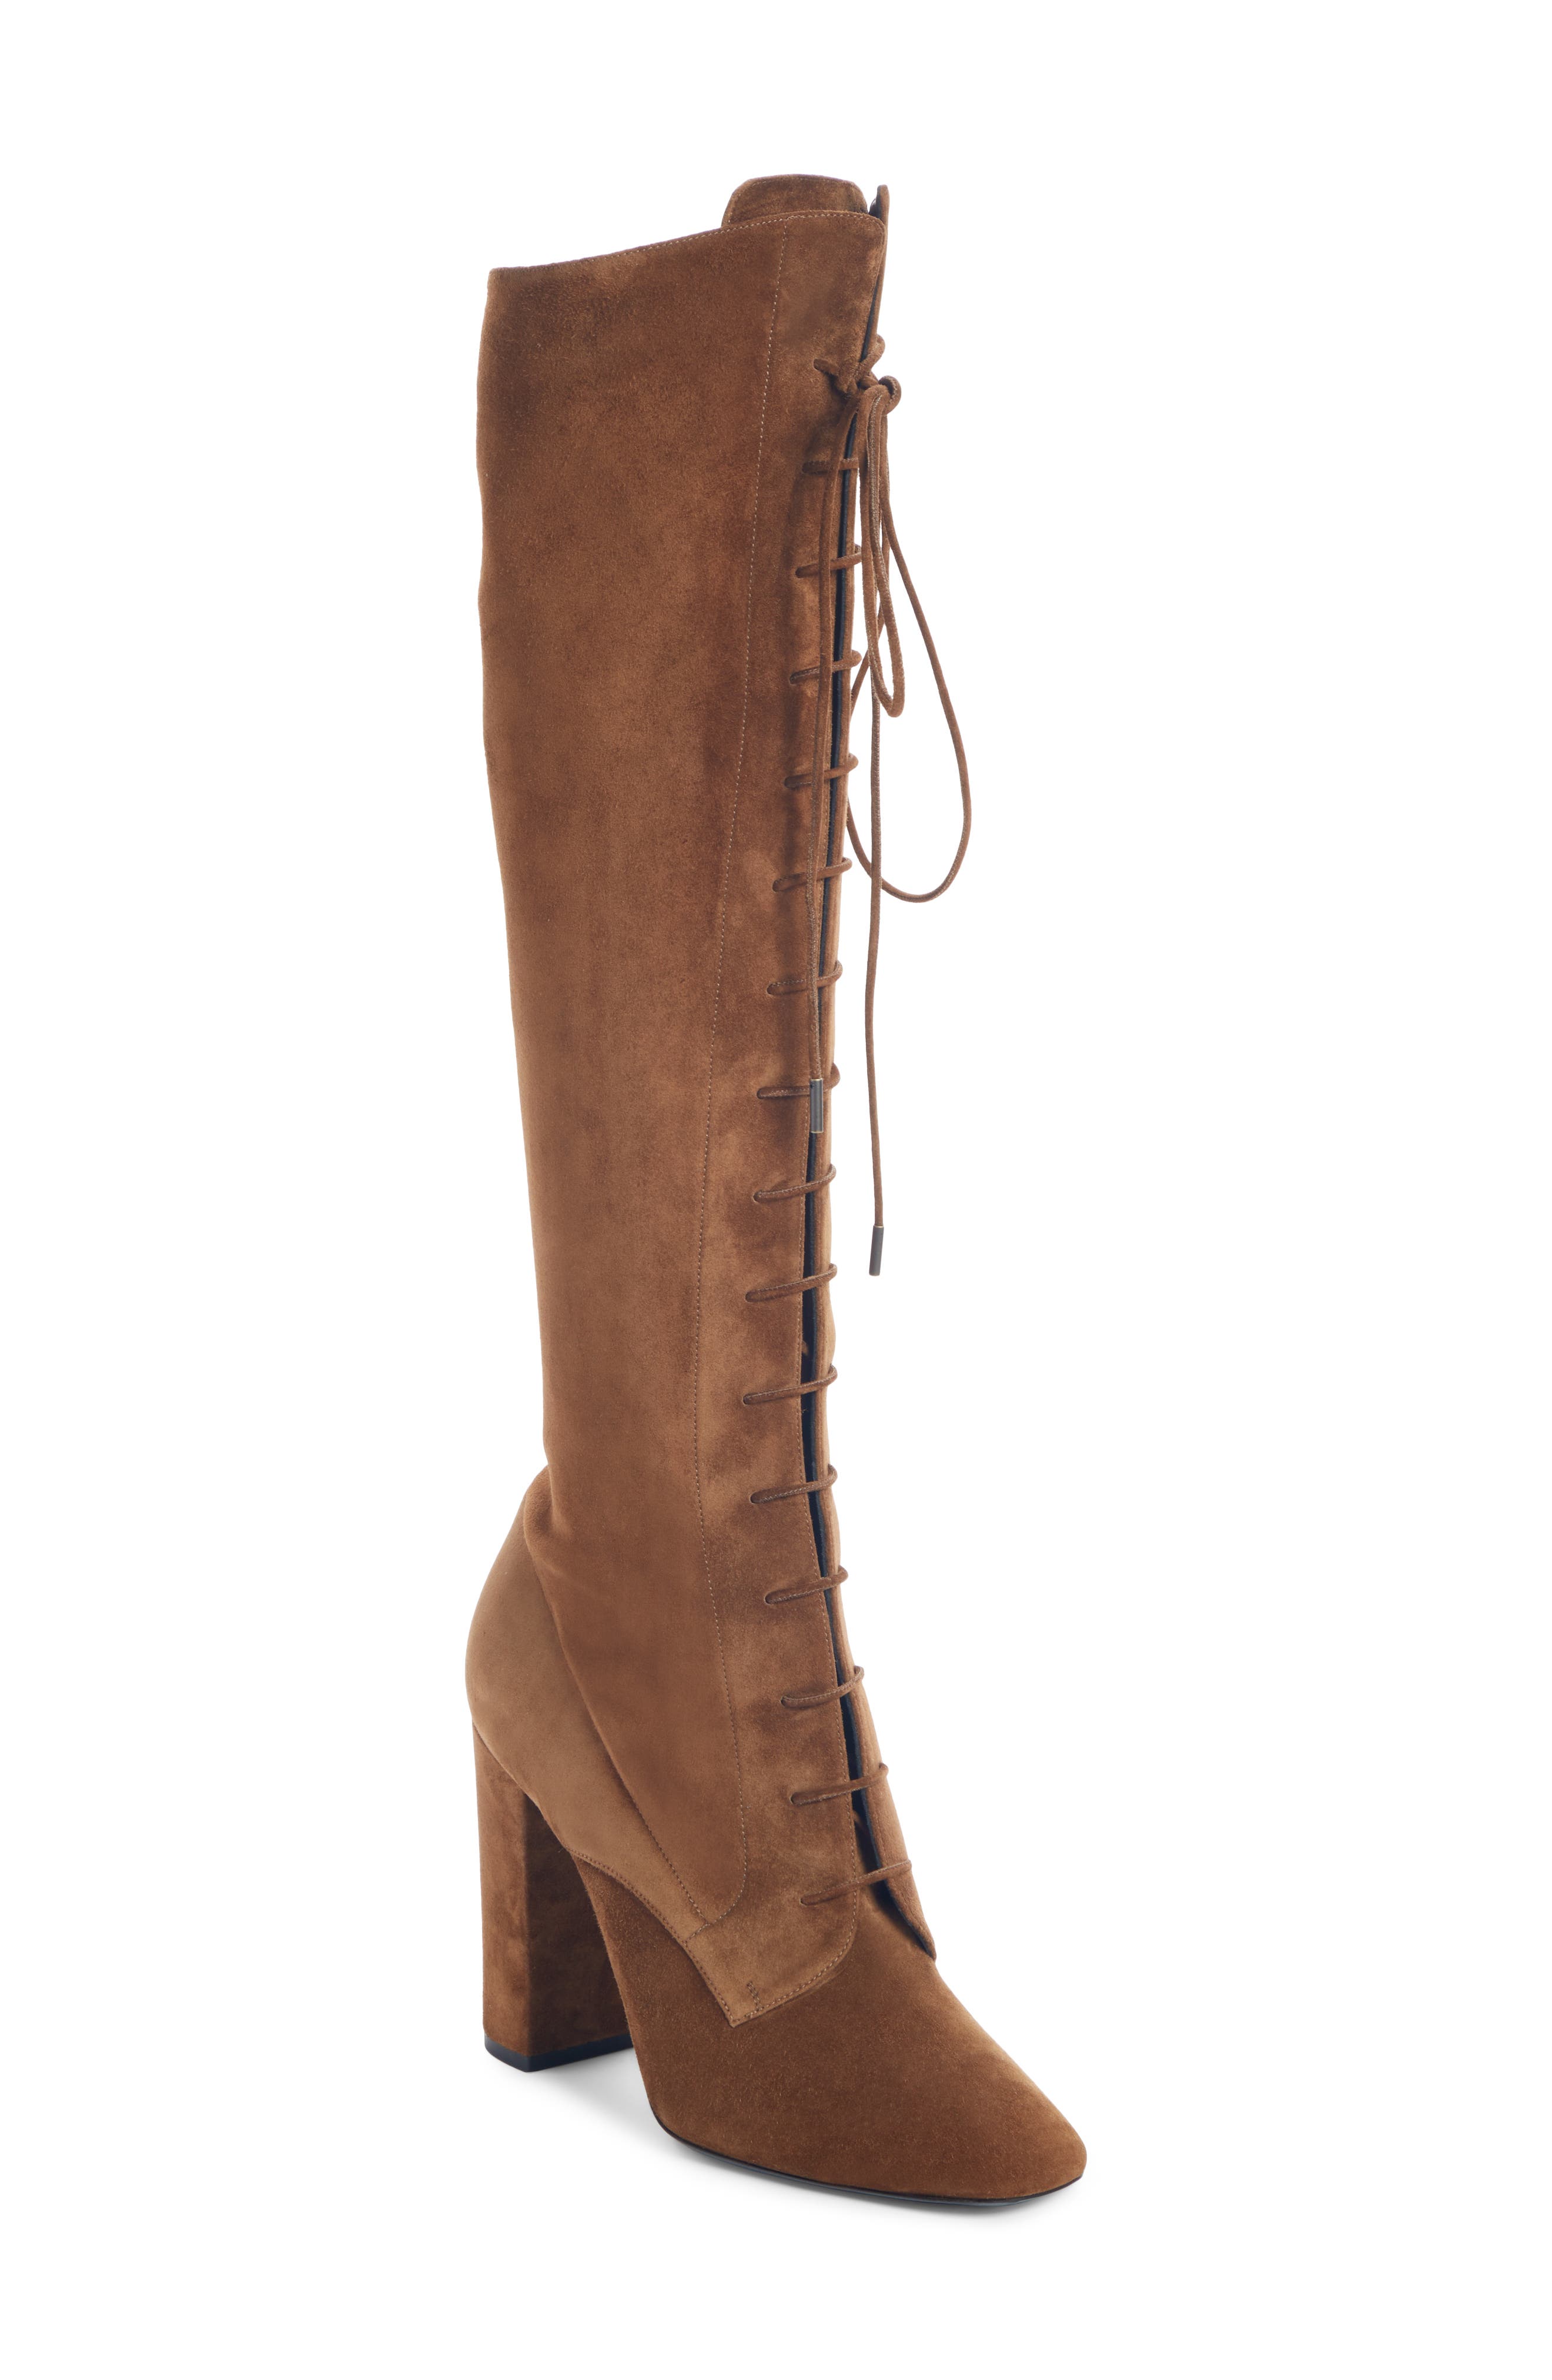 ysl boots nordstrom